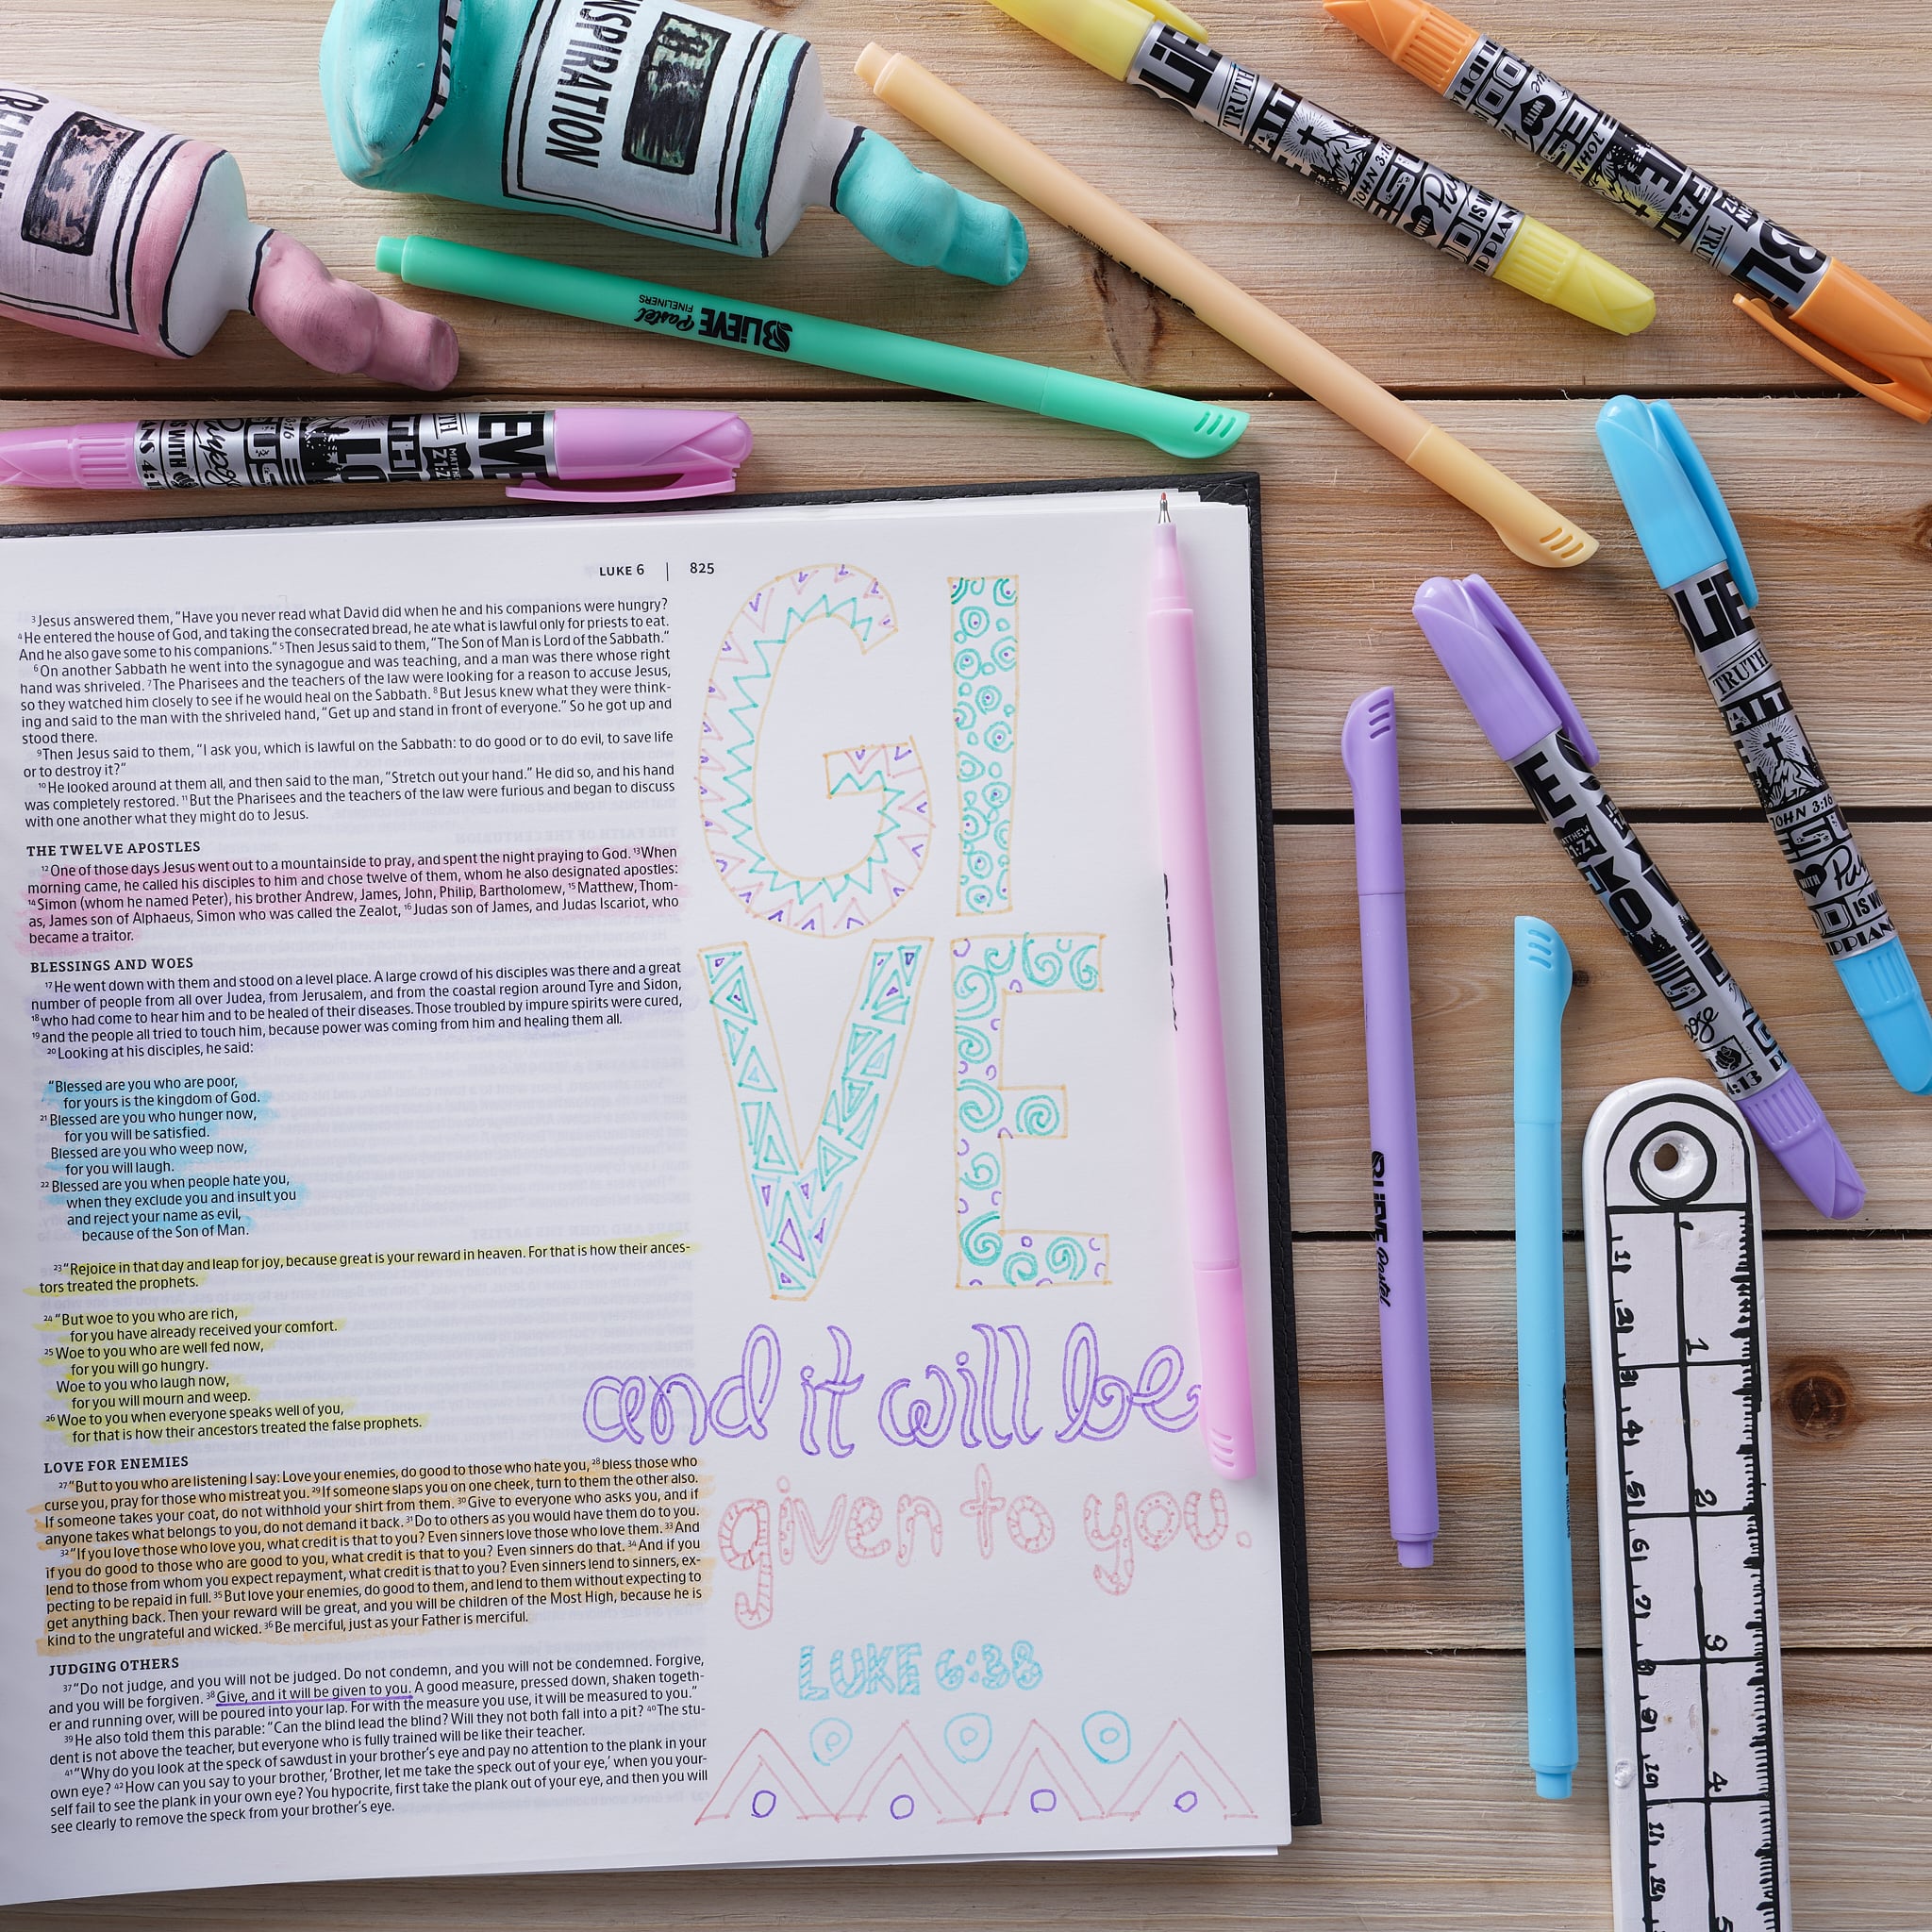 Bible Highlighters and pens for bible journaling study – Blieve